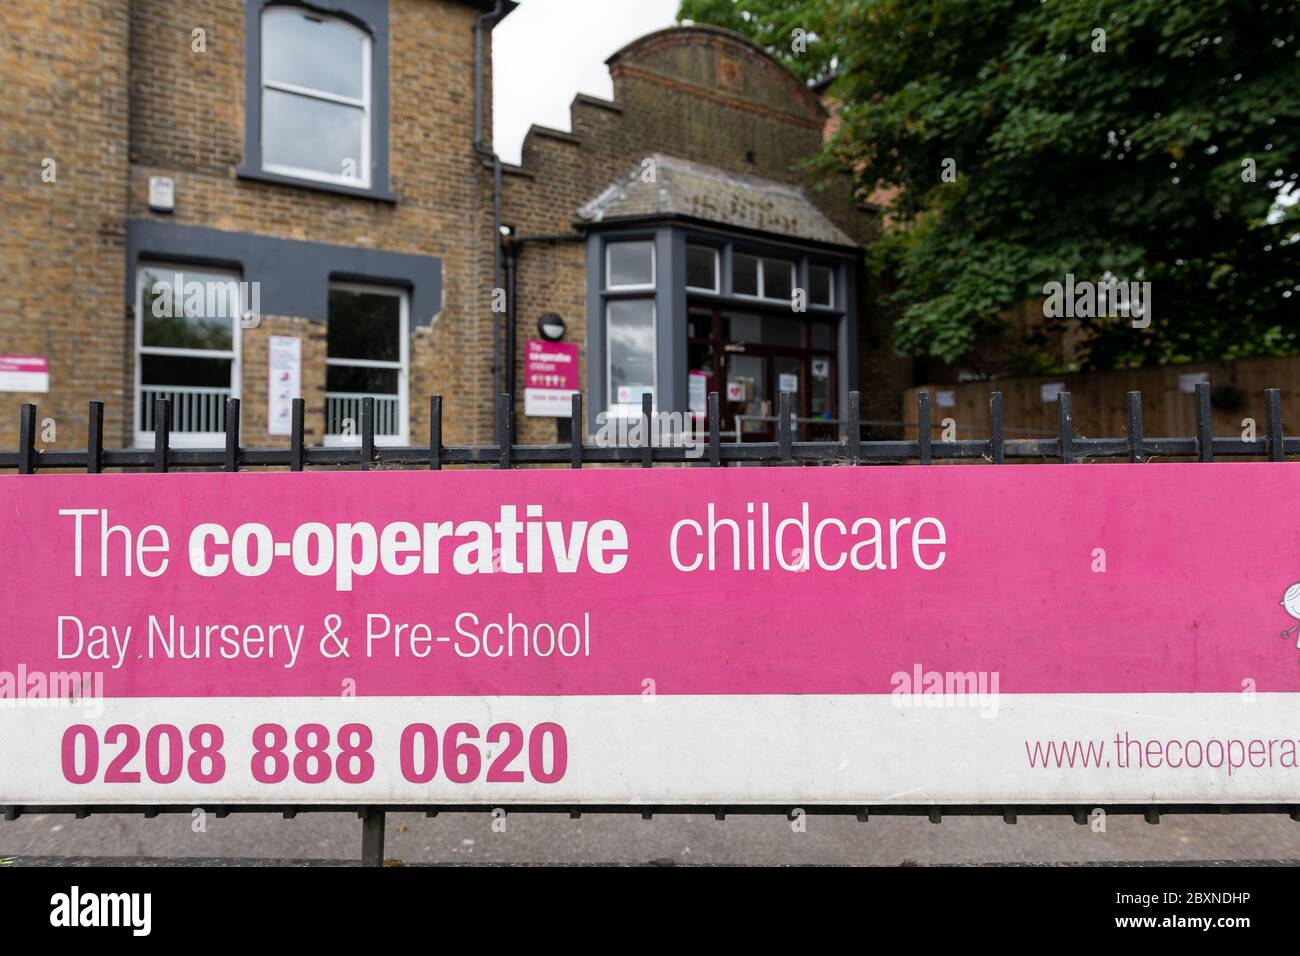 The sign for a childcare day nursery run by the Co-operative. Stock Photo